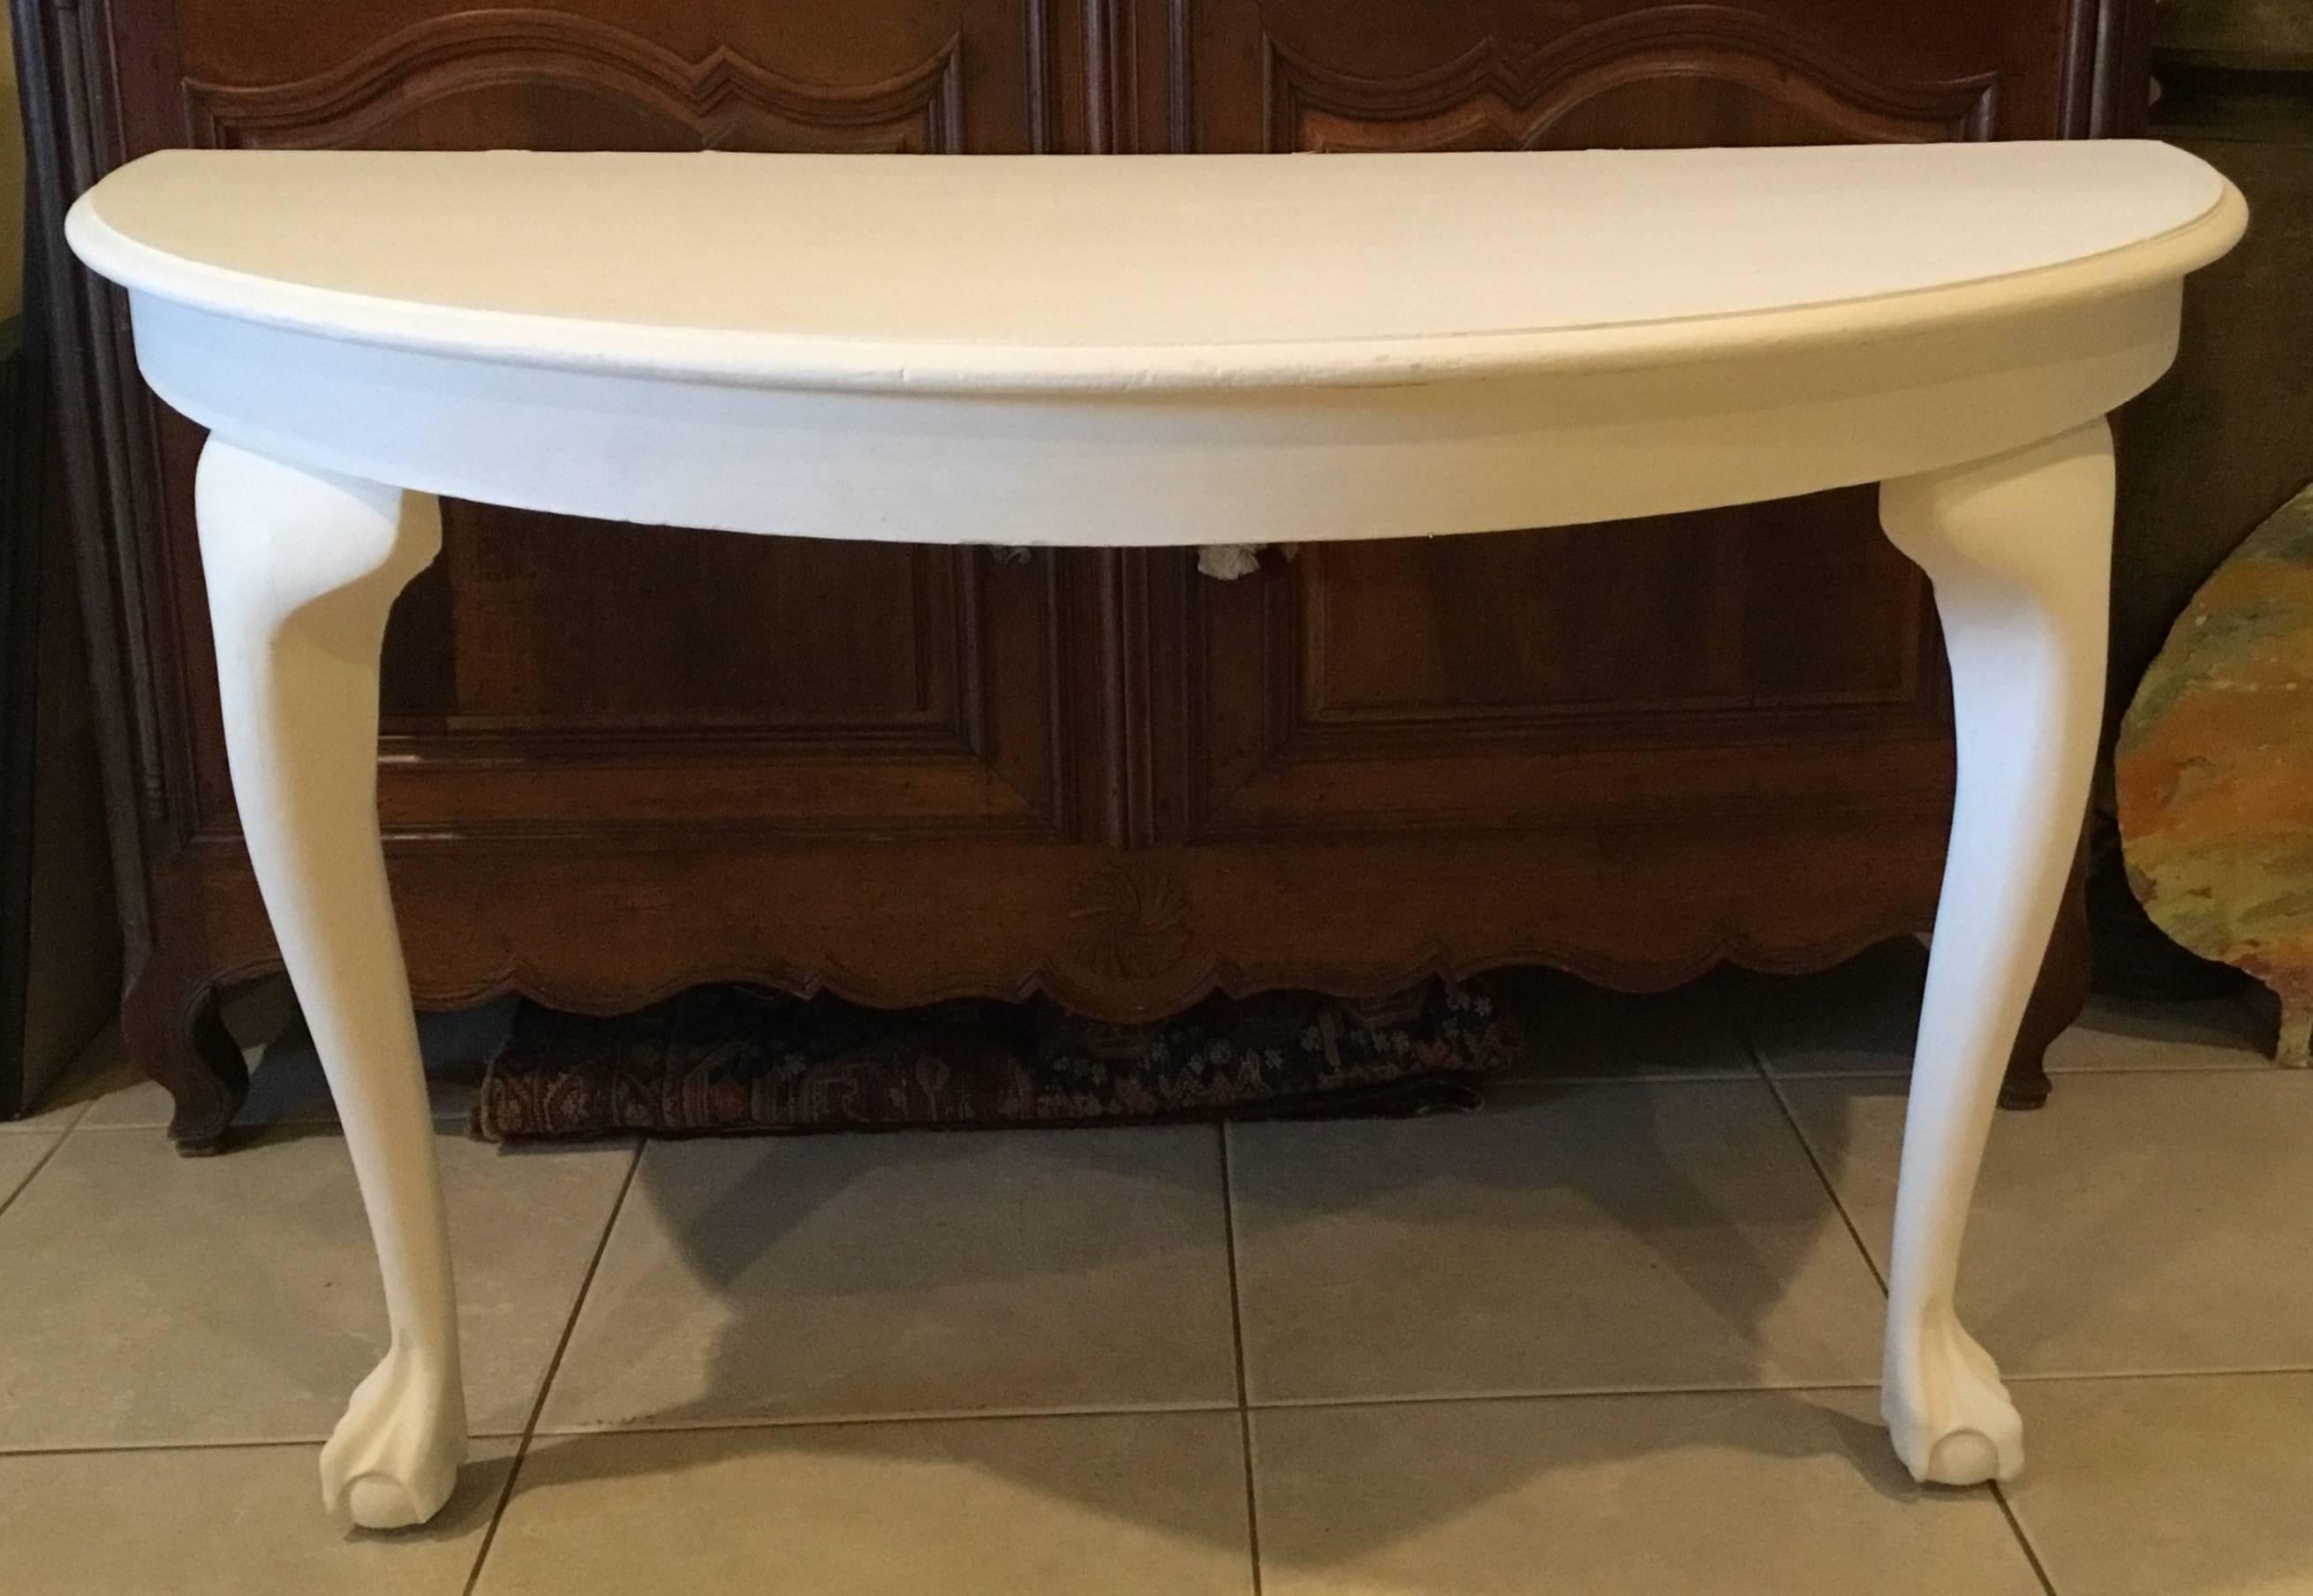 Pair of elegant console table made of mahogany wood with claw feet painted in white. This pair
was originally a large round table that was converted to a nice functional pair of console.